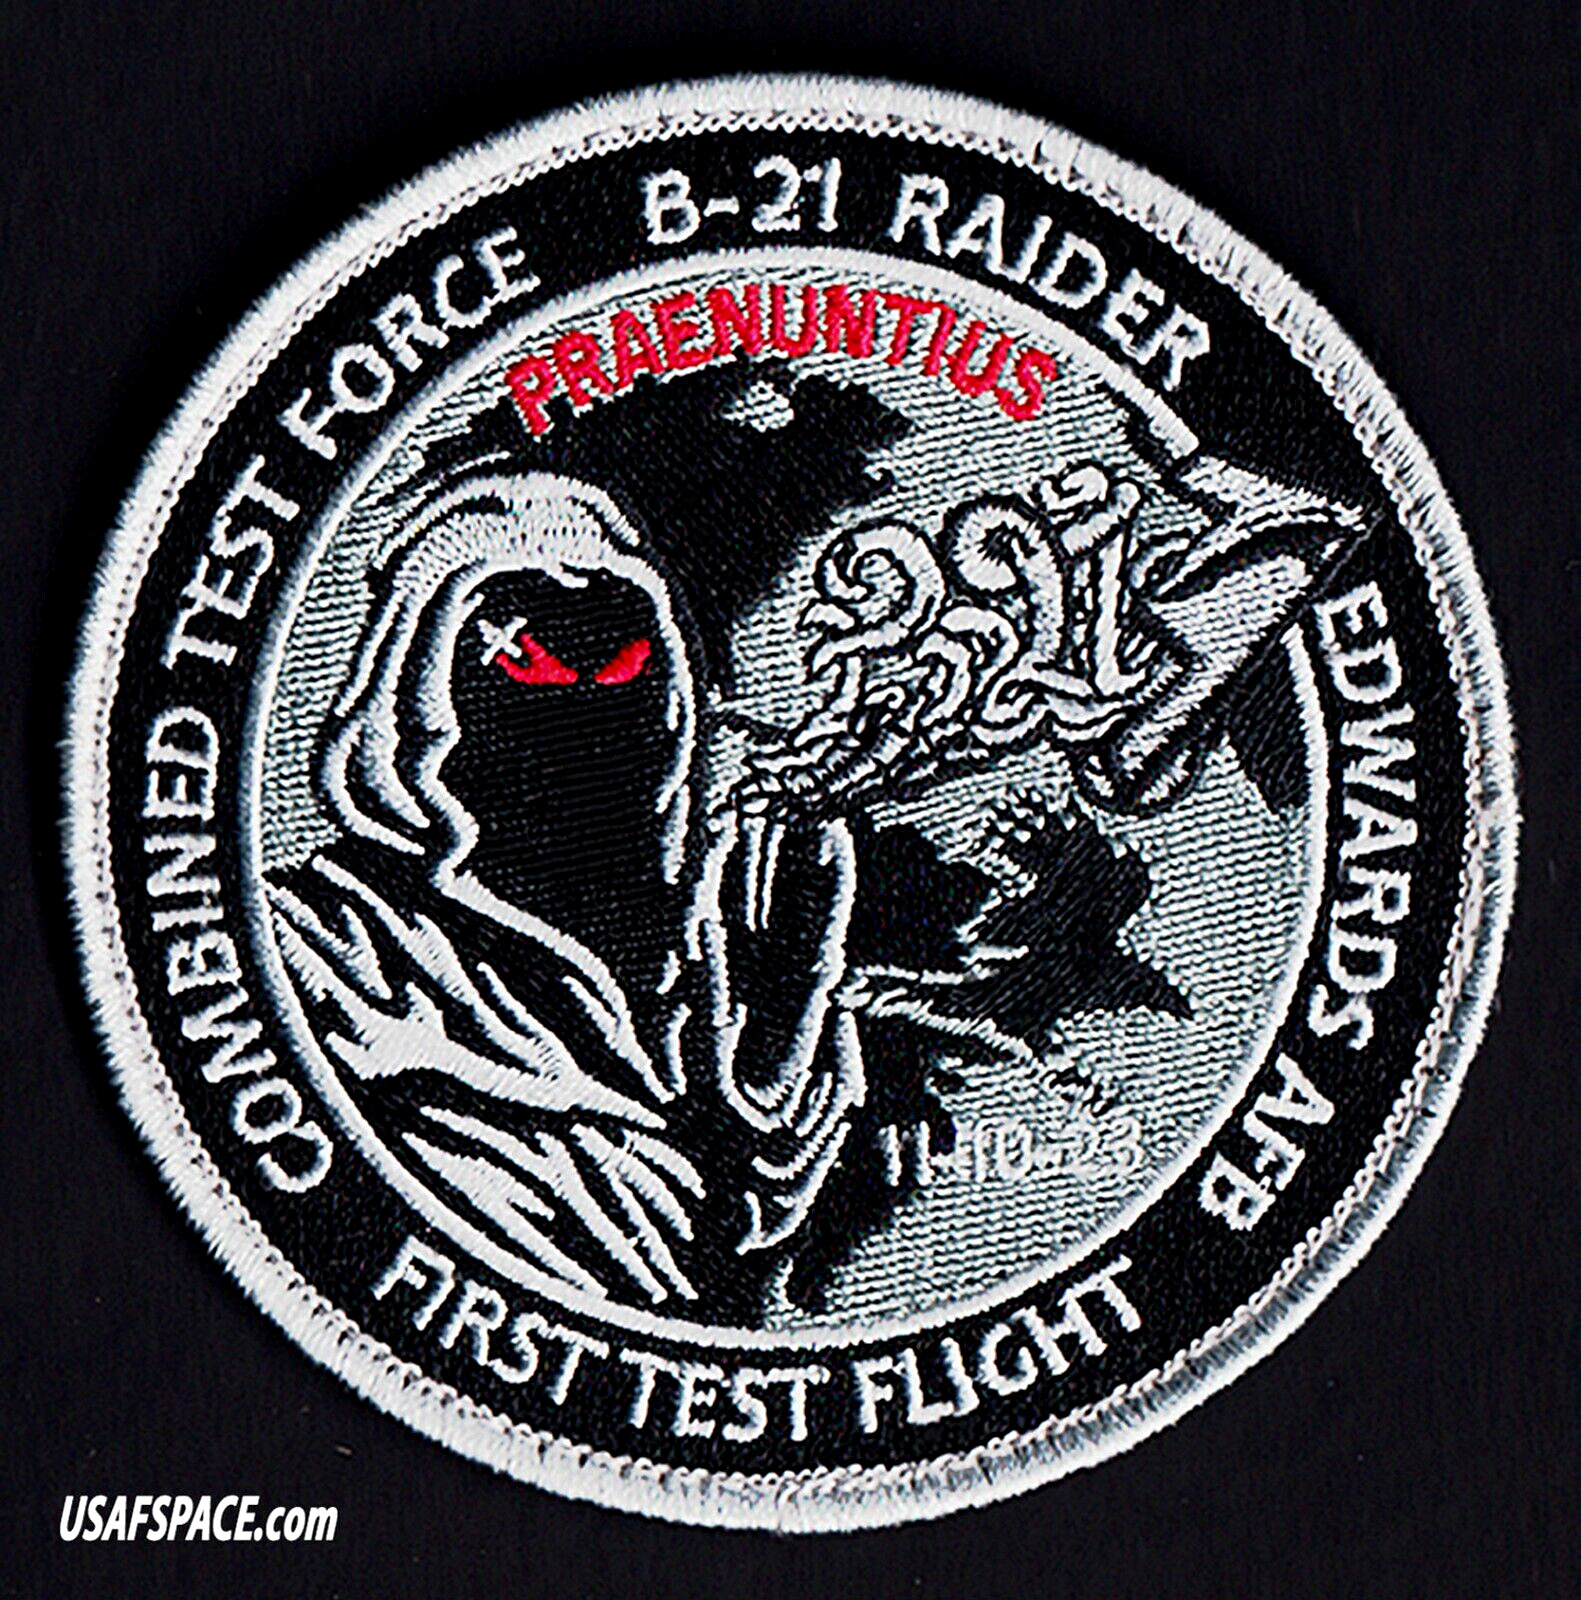 USAF B-21-RAIDER-FIRST TEST FLIGHT-COMBINED TEST FORCE- Edwards AFB- VEL PATCH